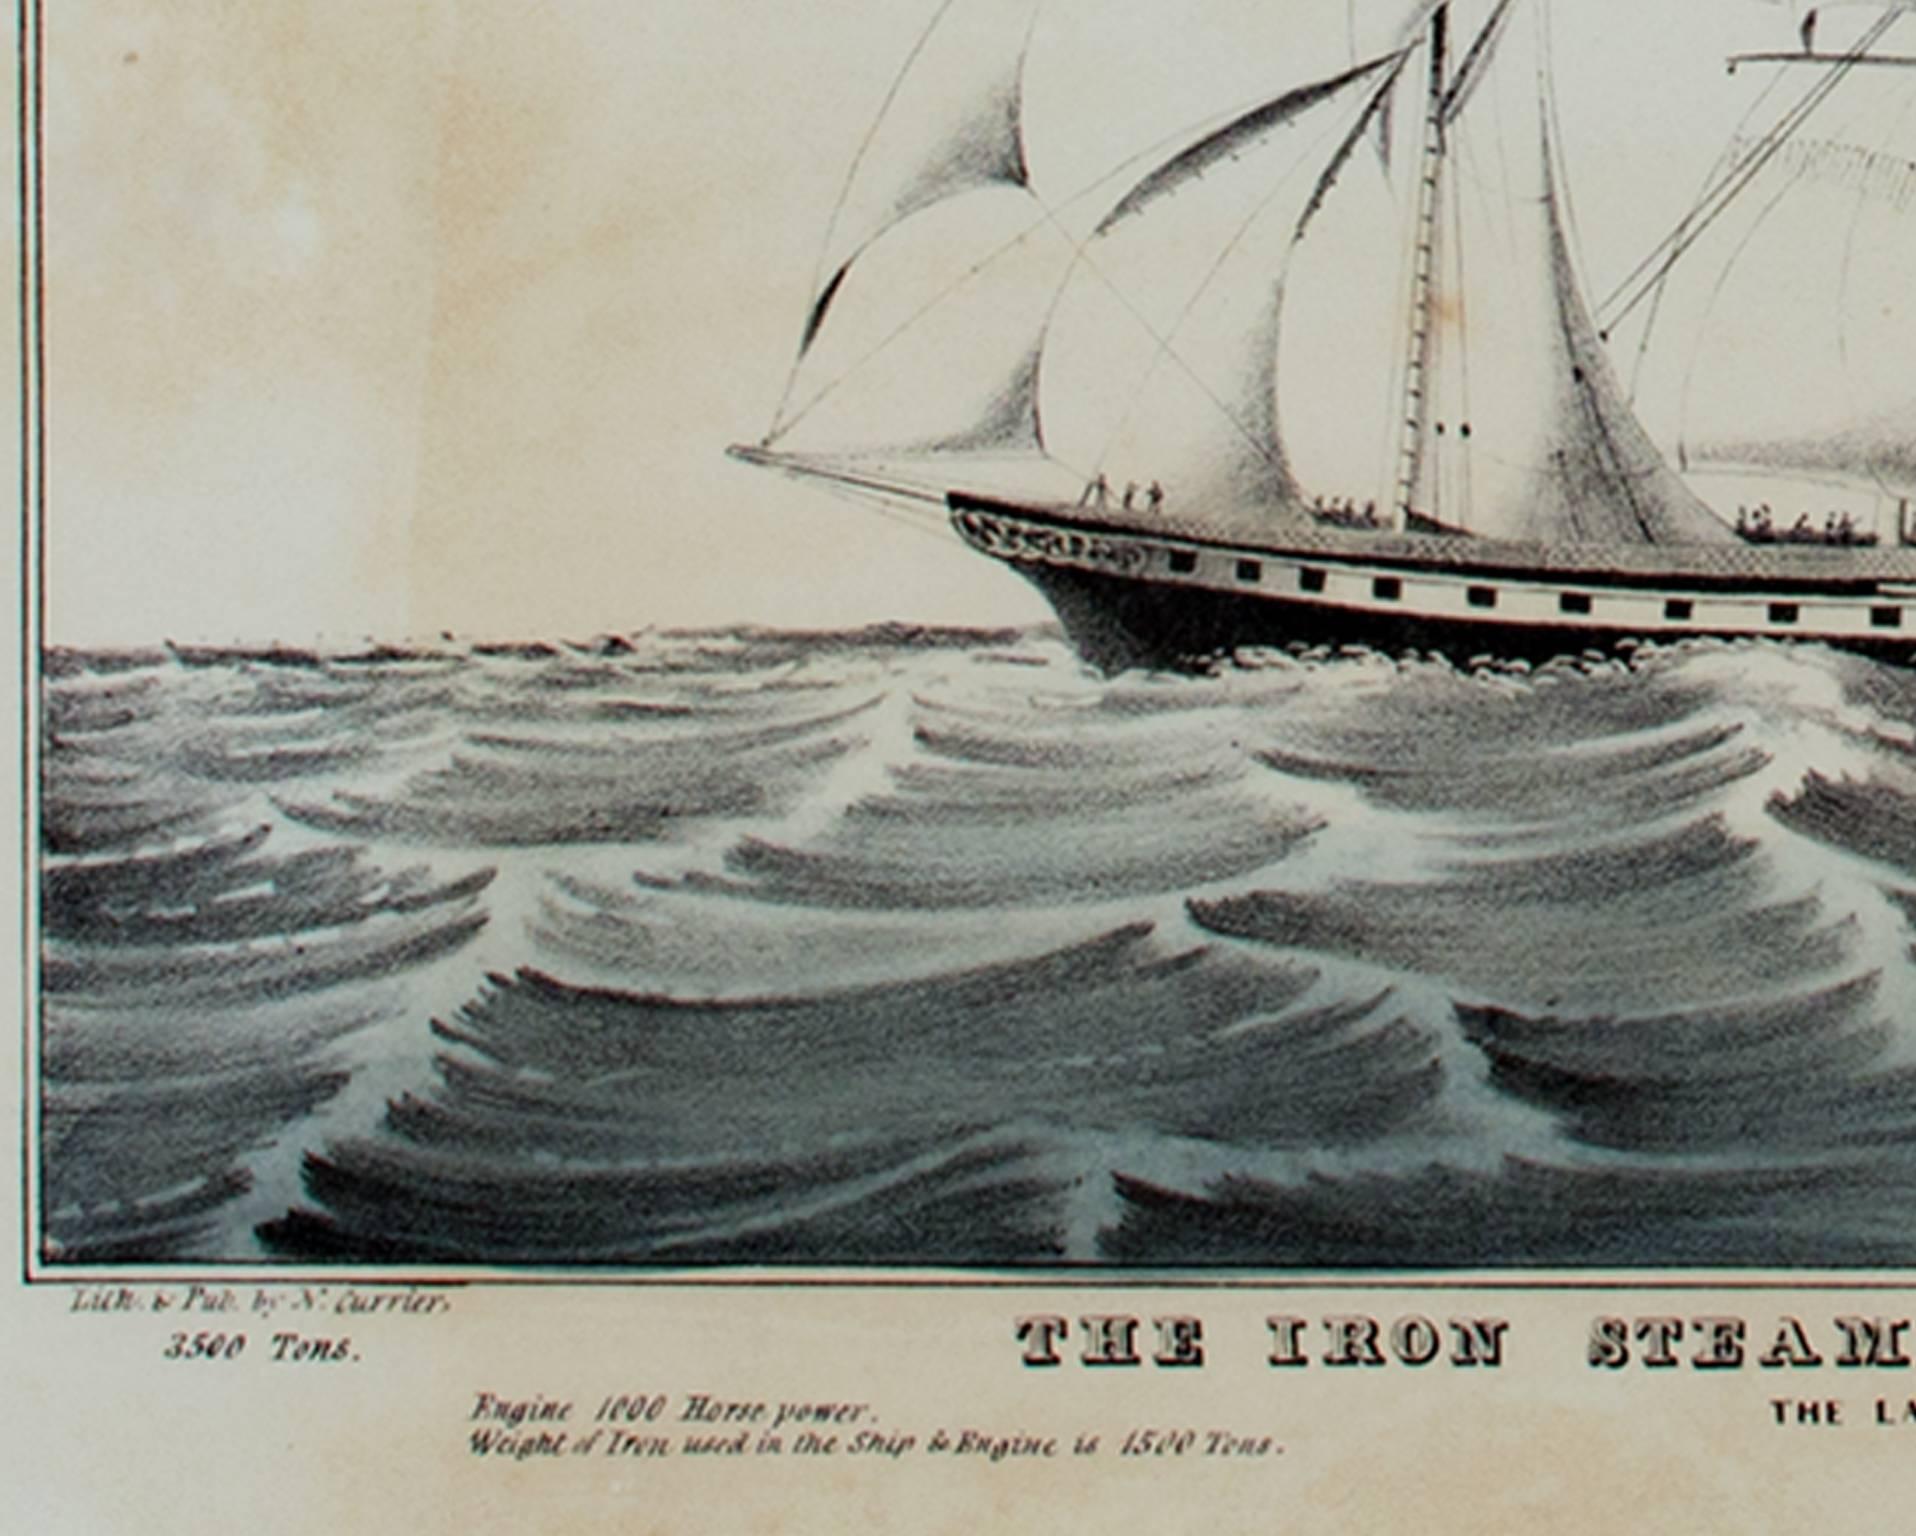 19th century color lithograph seascape boat ship waves maritime landscape - Print by Currier & Ives